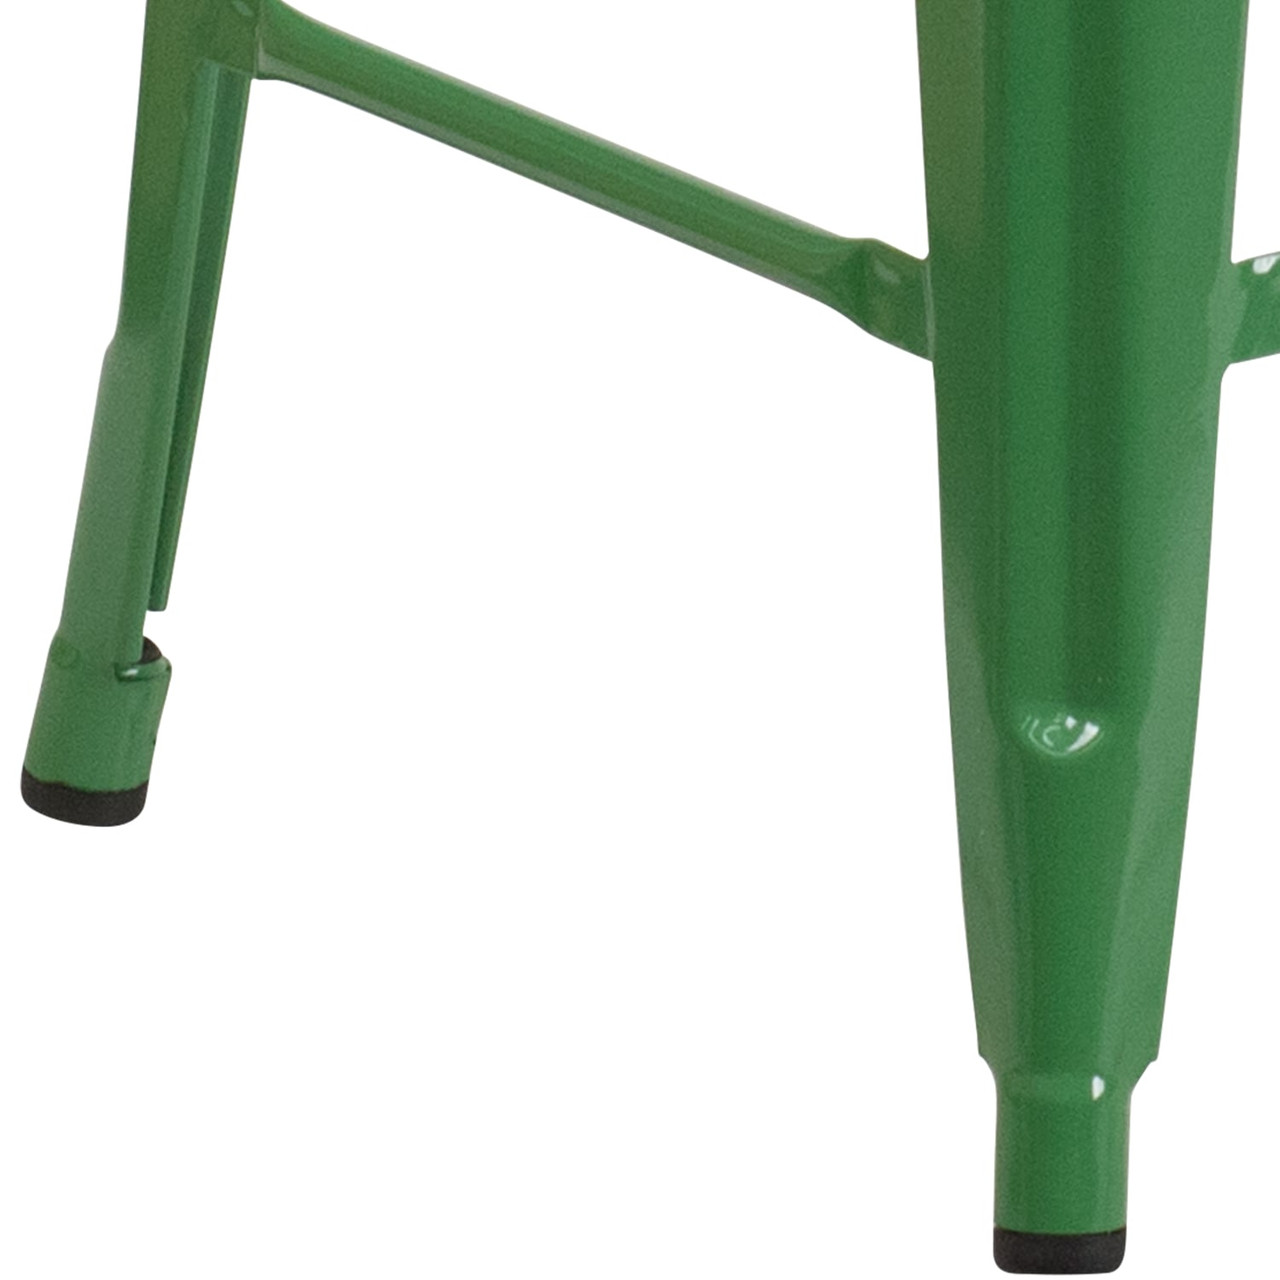 24” High Backless Green Metal Indoor-Outdoor Counter Height Stool with Square Seat